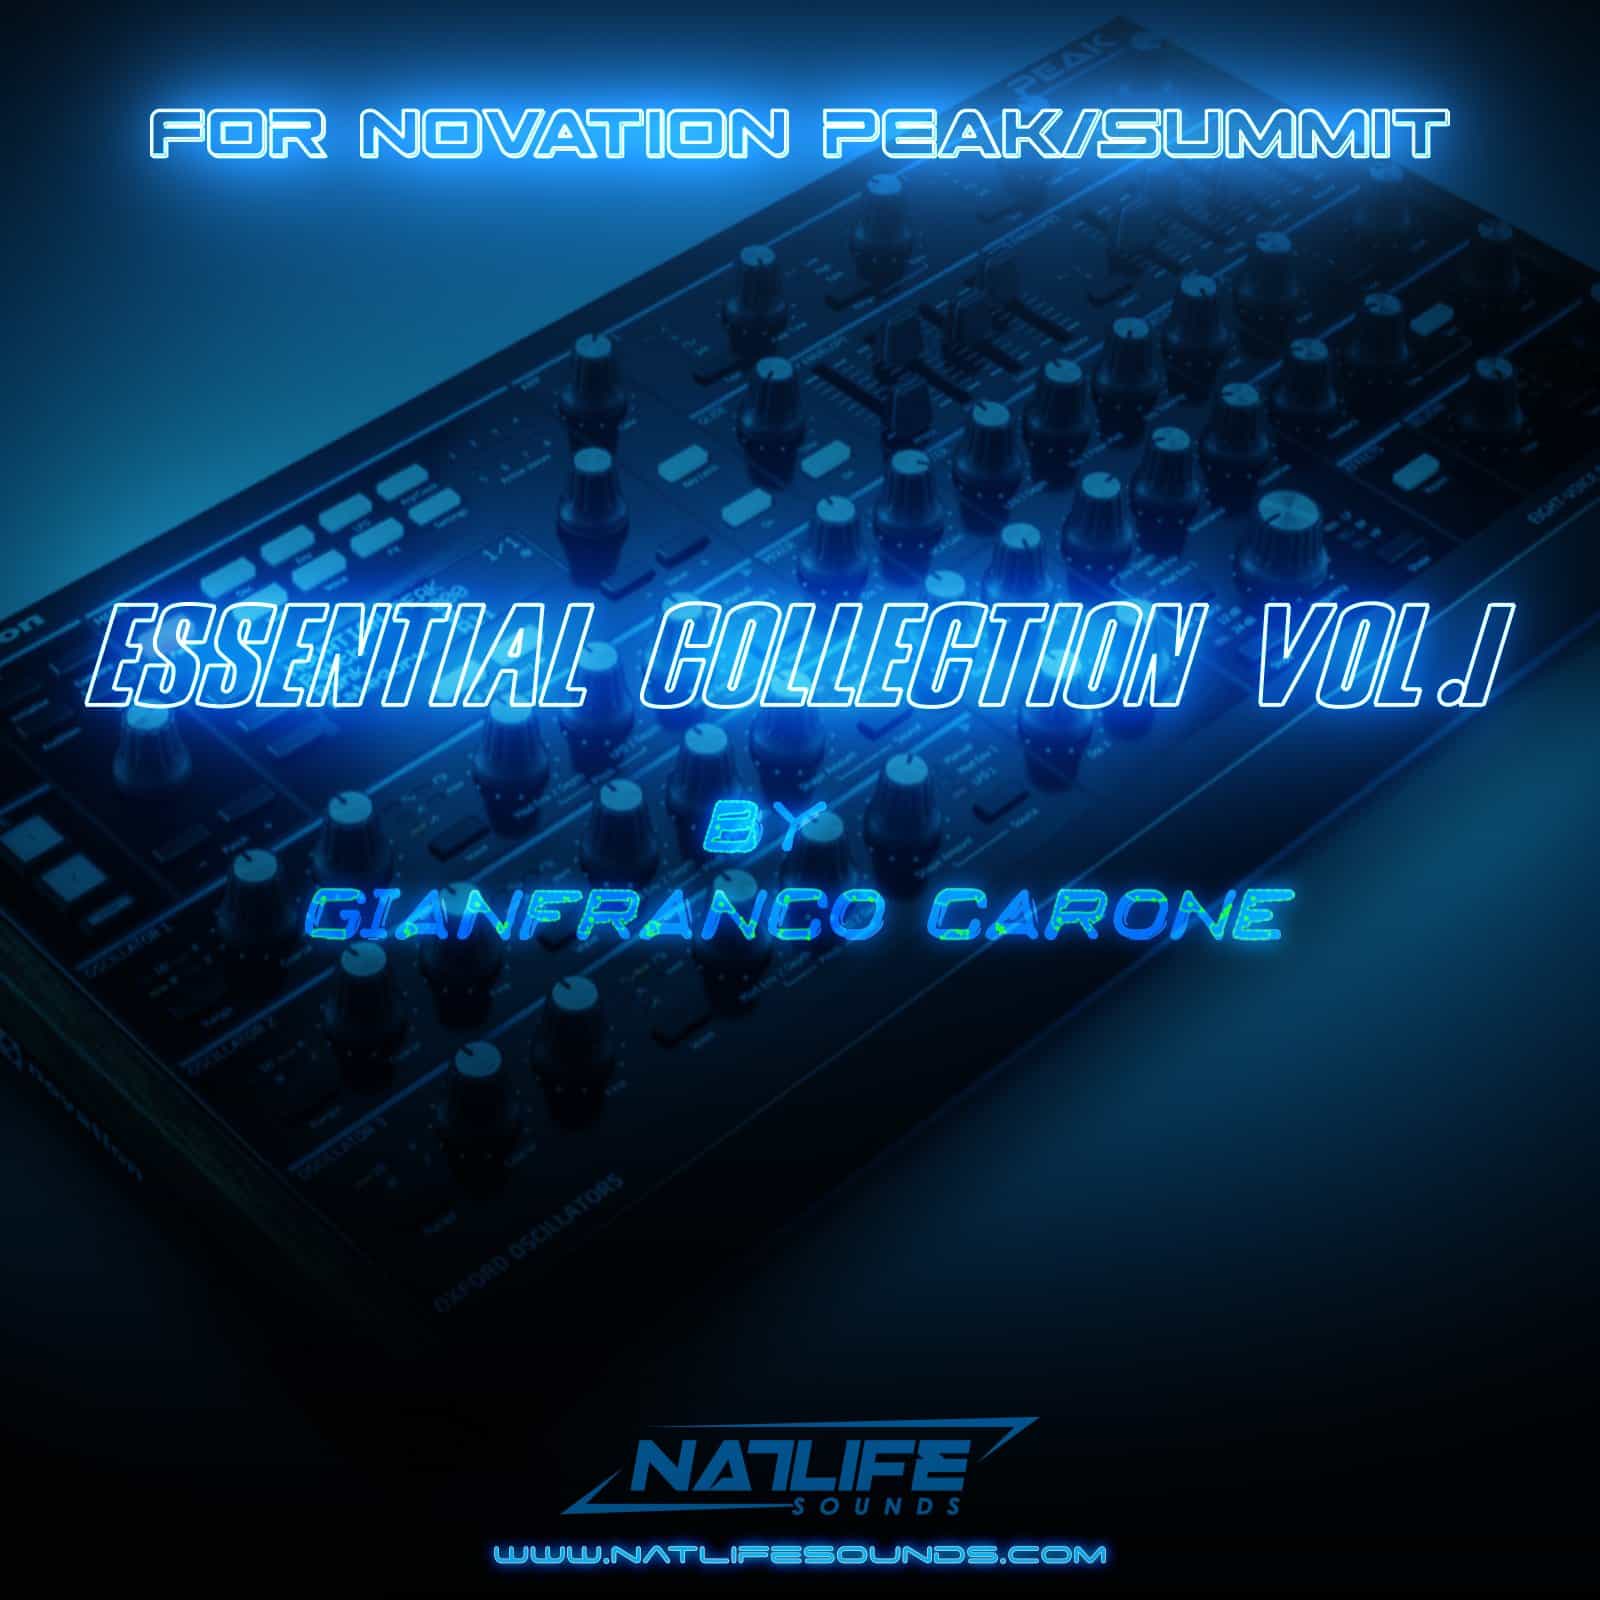 Essential Collection Vol.1 for Novation SummitPeak by NatLife Sounds